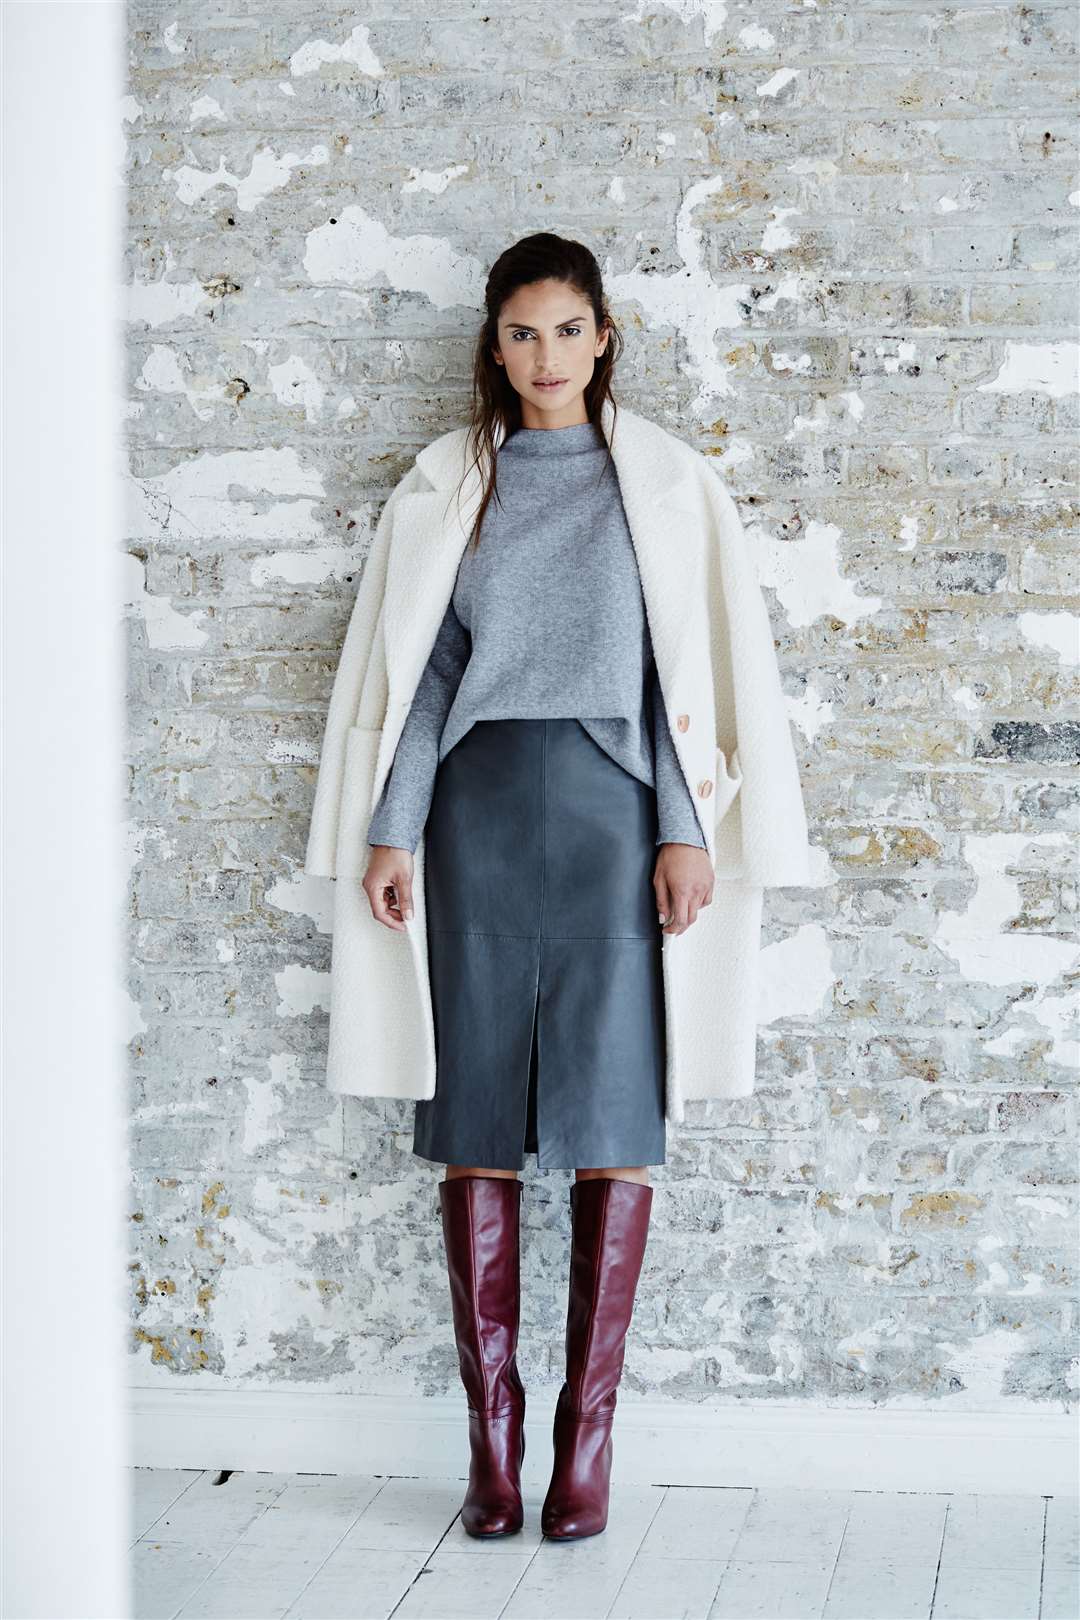 Tu crombie coat, £50; Knit top, £25; Leather pencil skirt, £50; Long leather boots, £80. all from Sainsbury's and in store from November 9